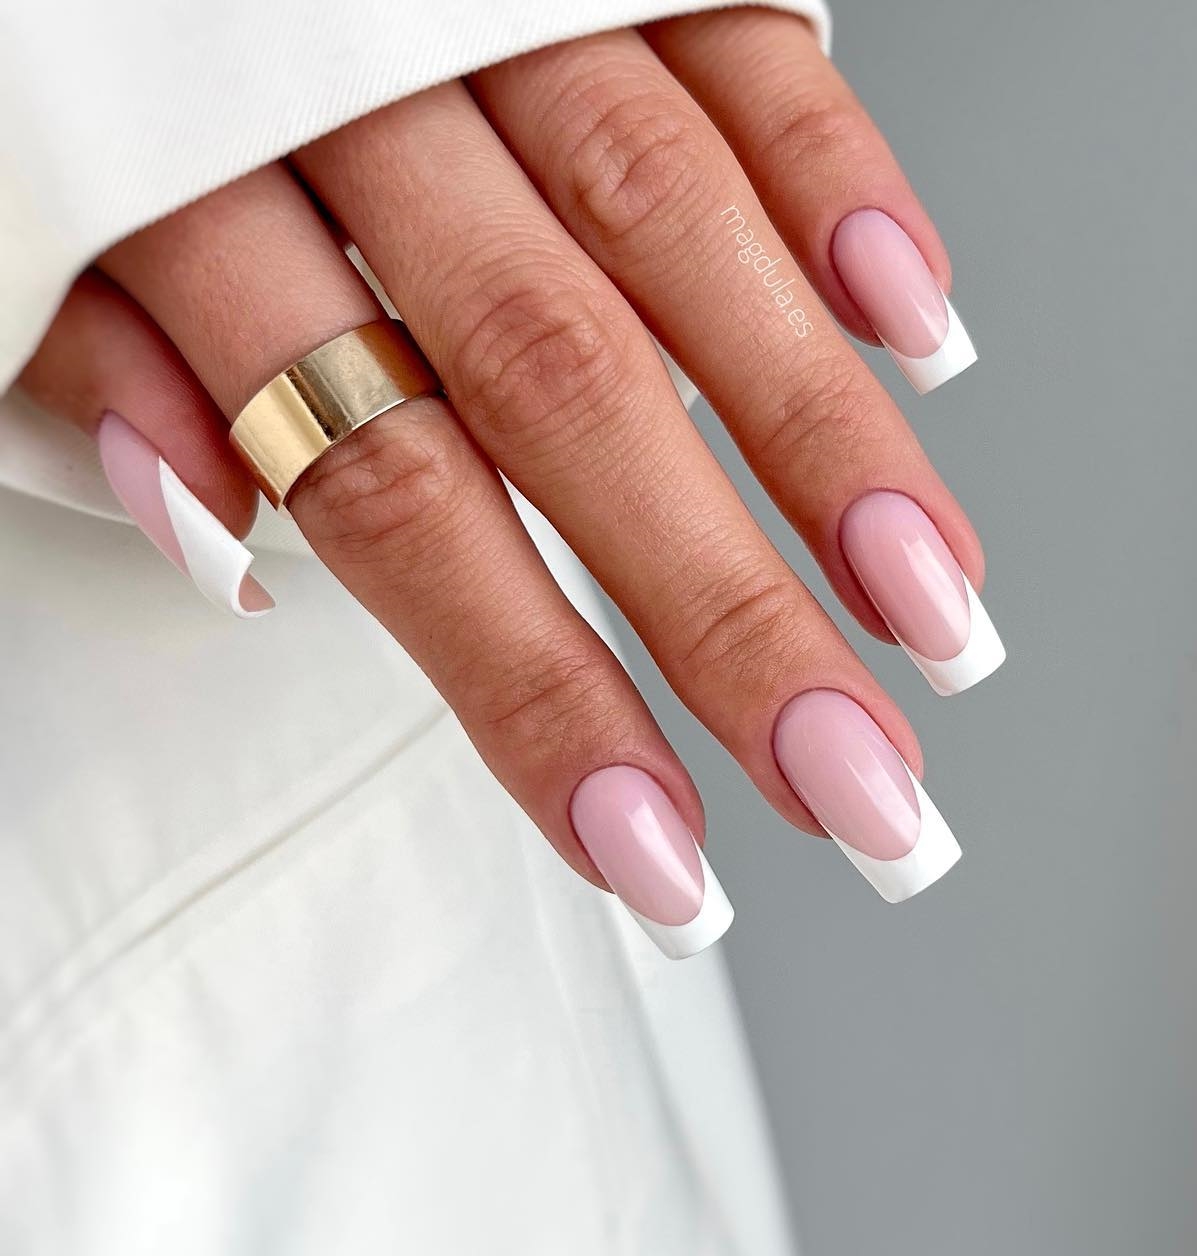 Long Square White French Nail Tips